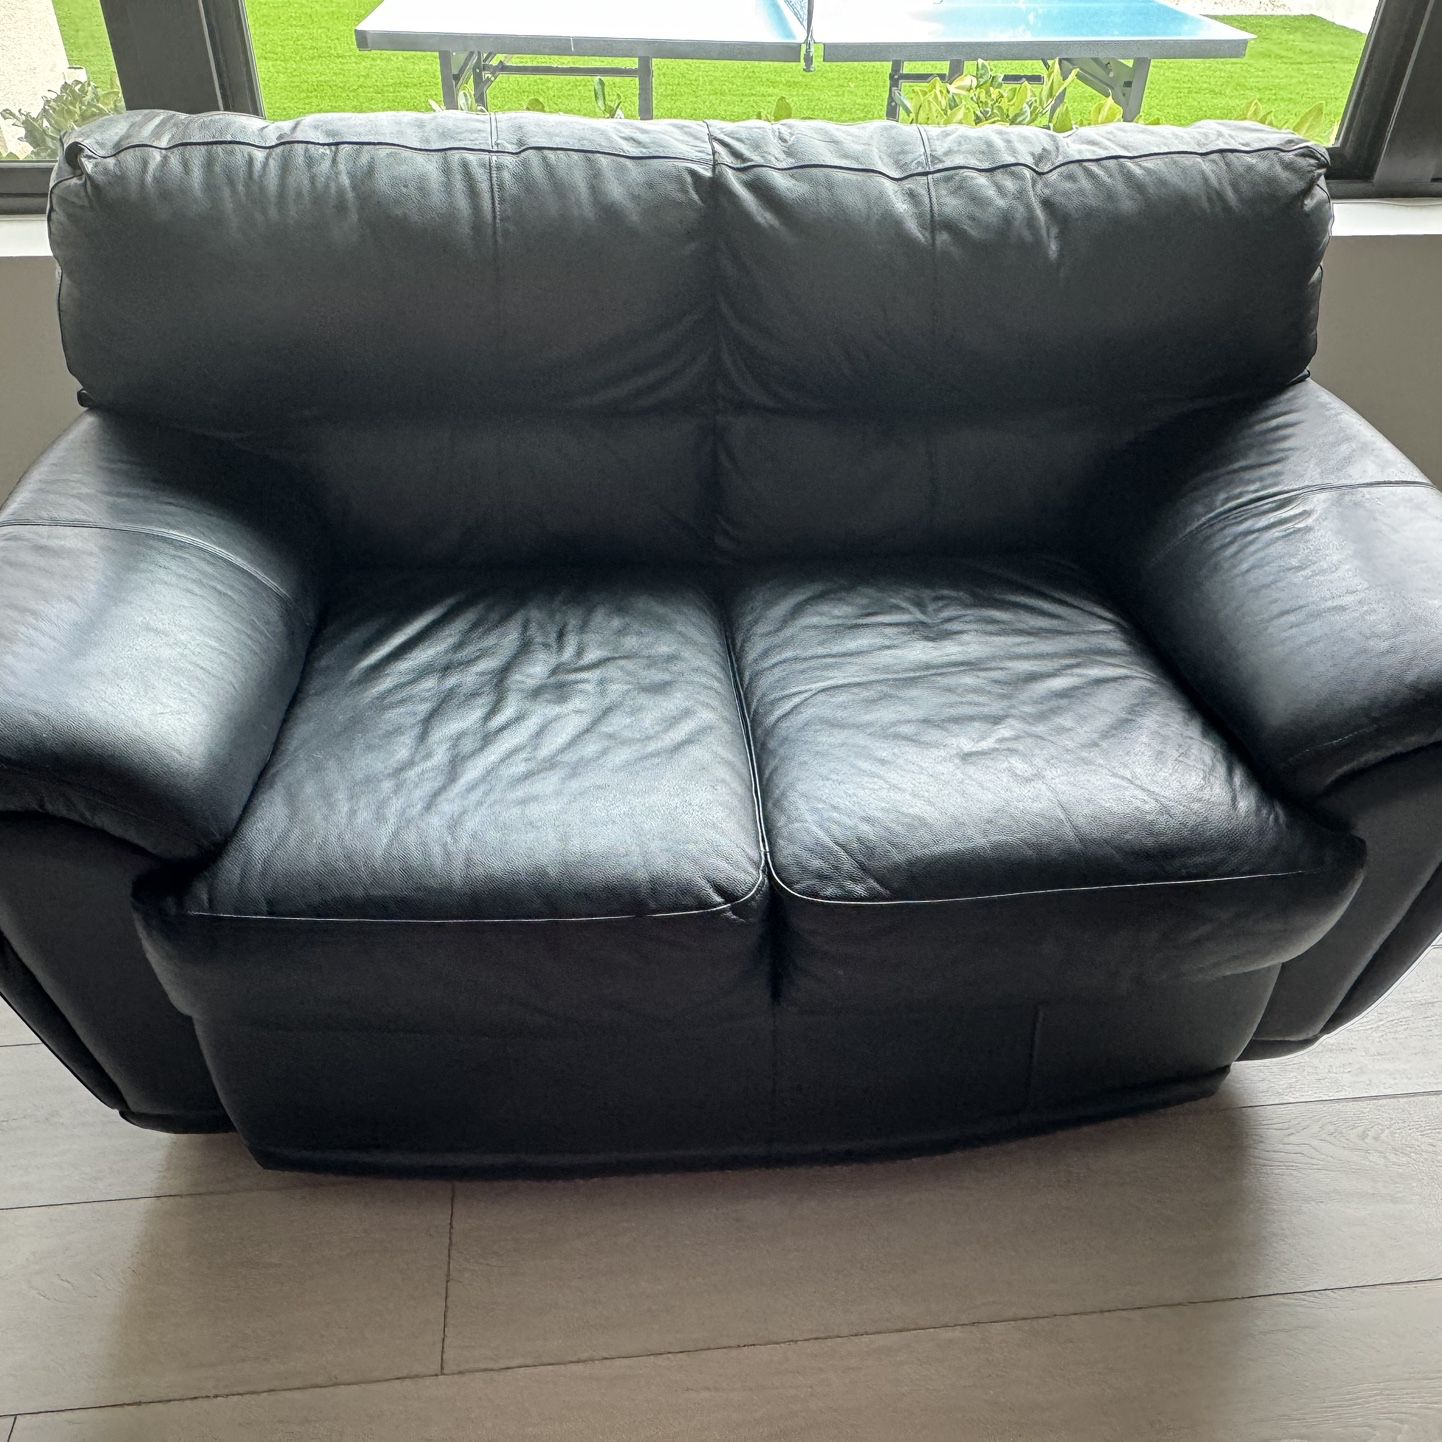 Black Leather Love Seat - Large - Most Comfy Ever !! 